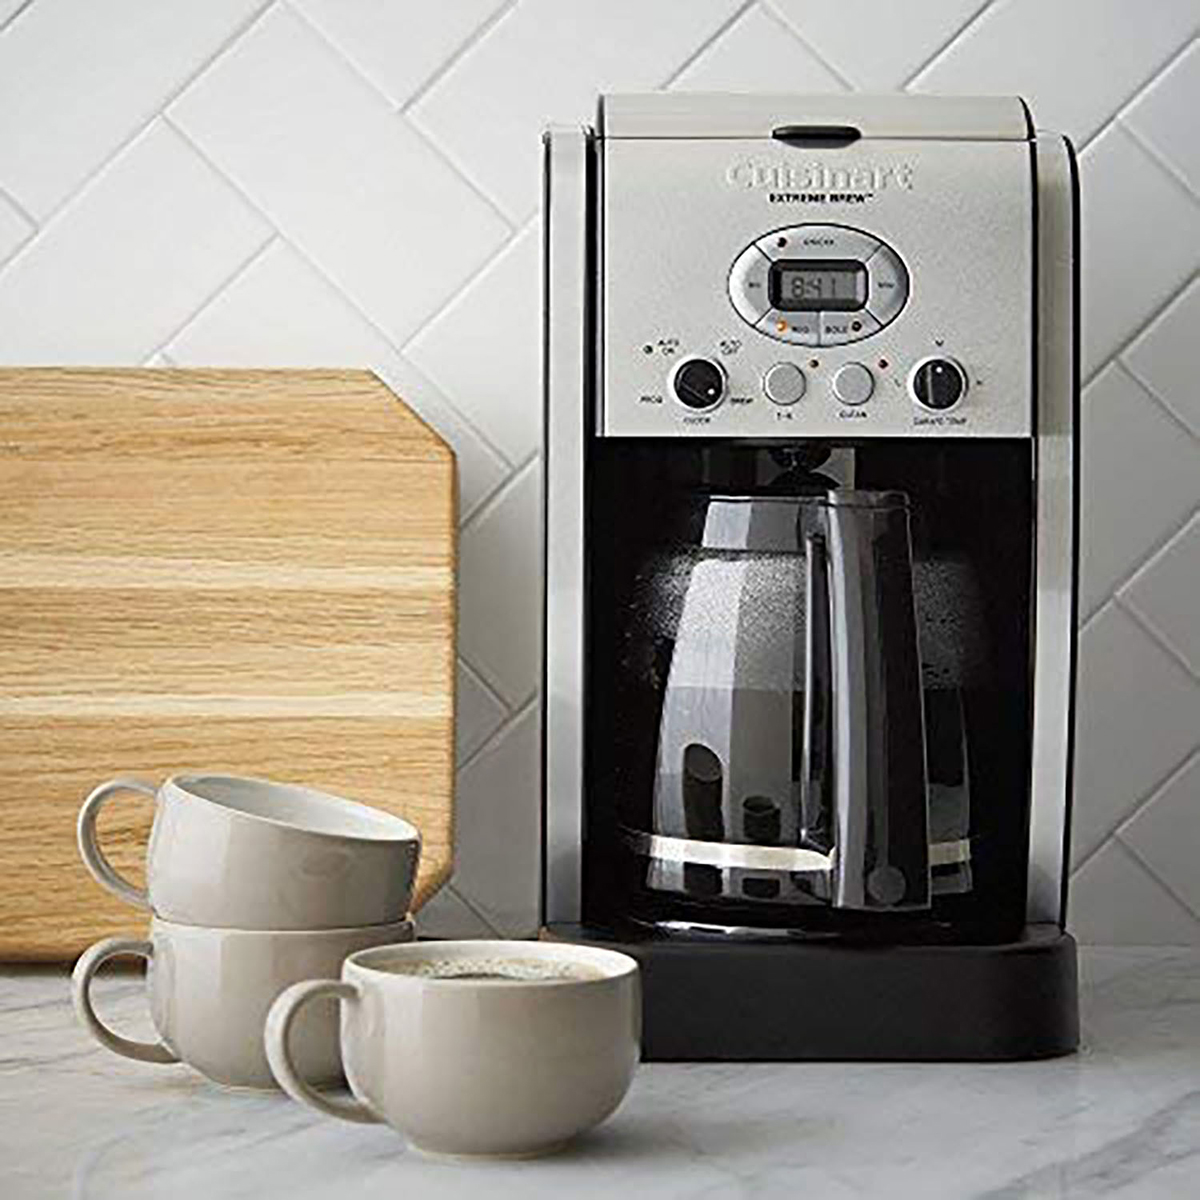 Cuisinart(R) Extreme Brew(R) 12 Cup Programmable Coffee Maker